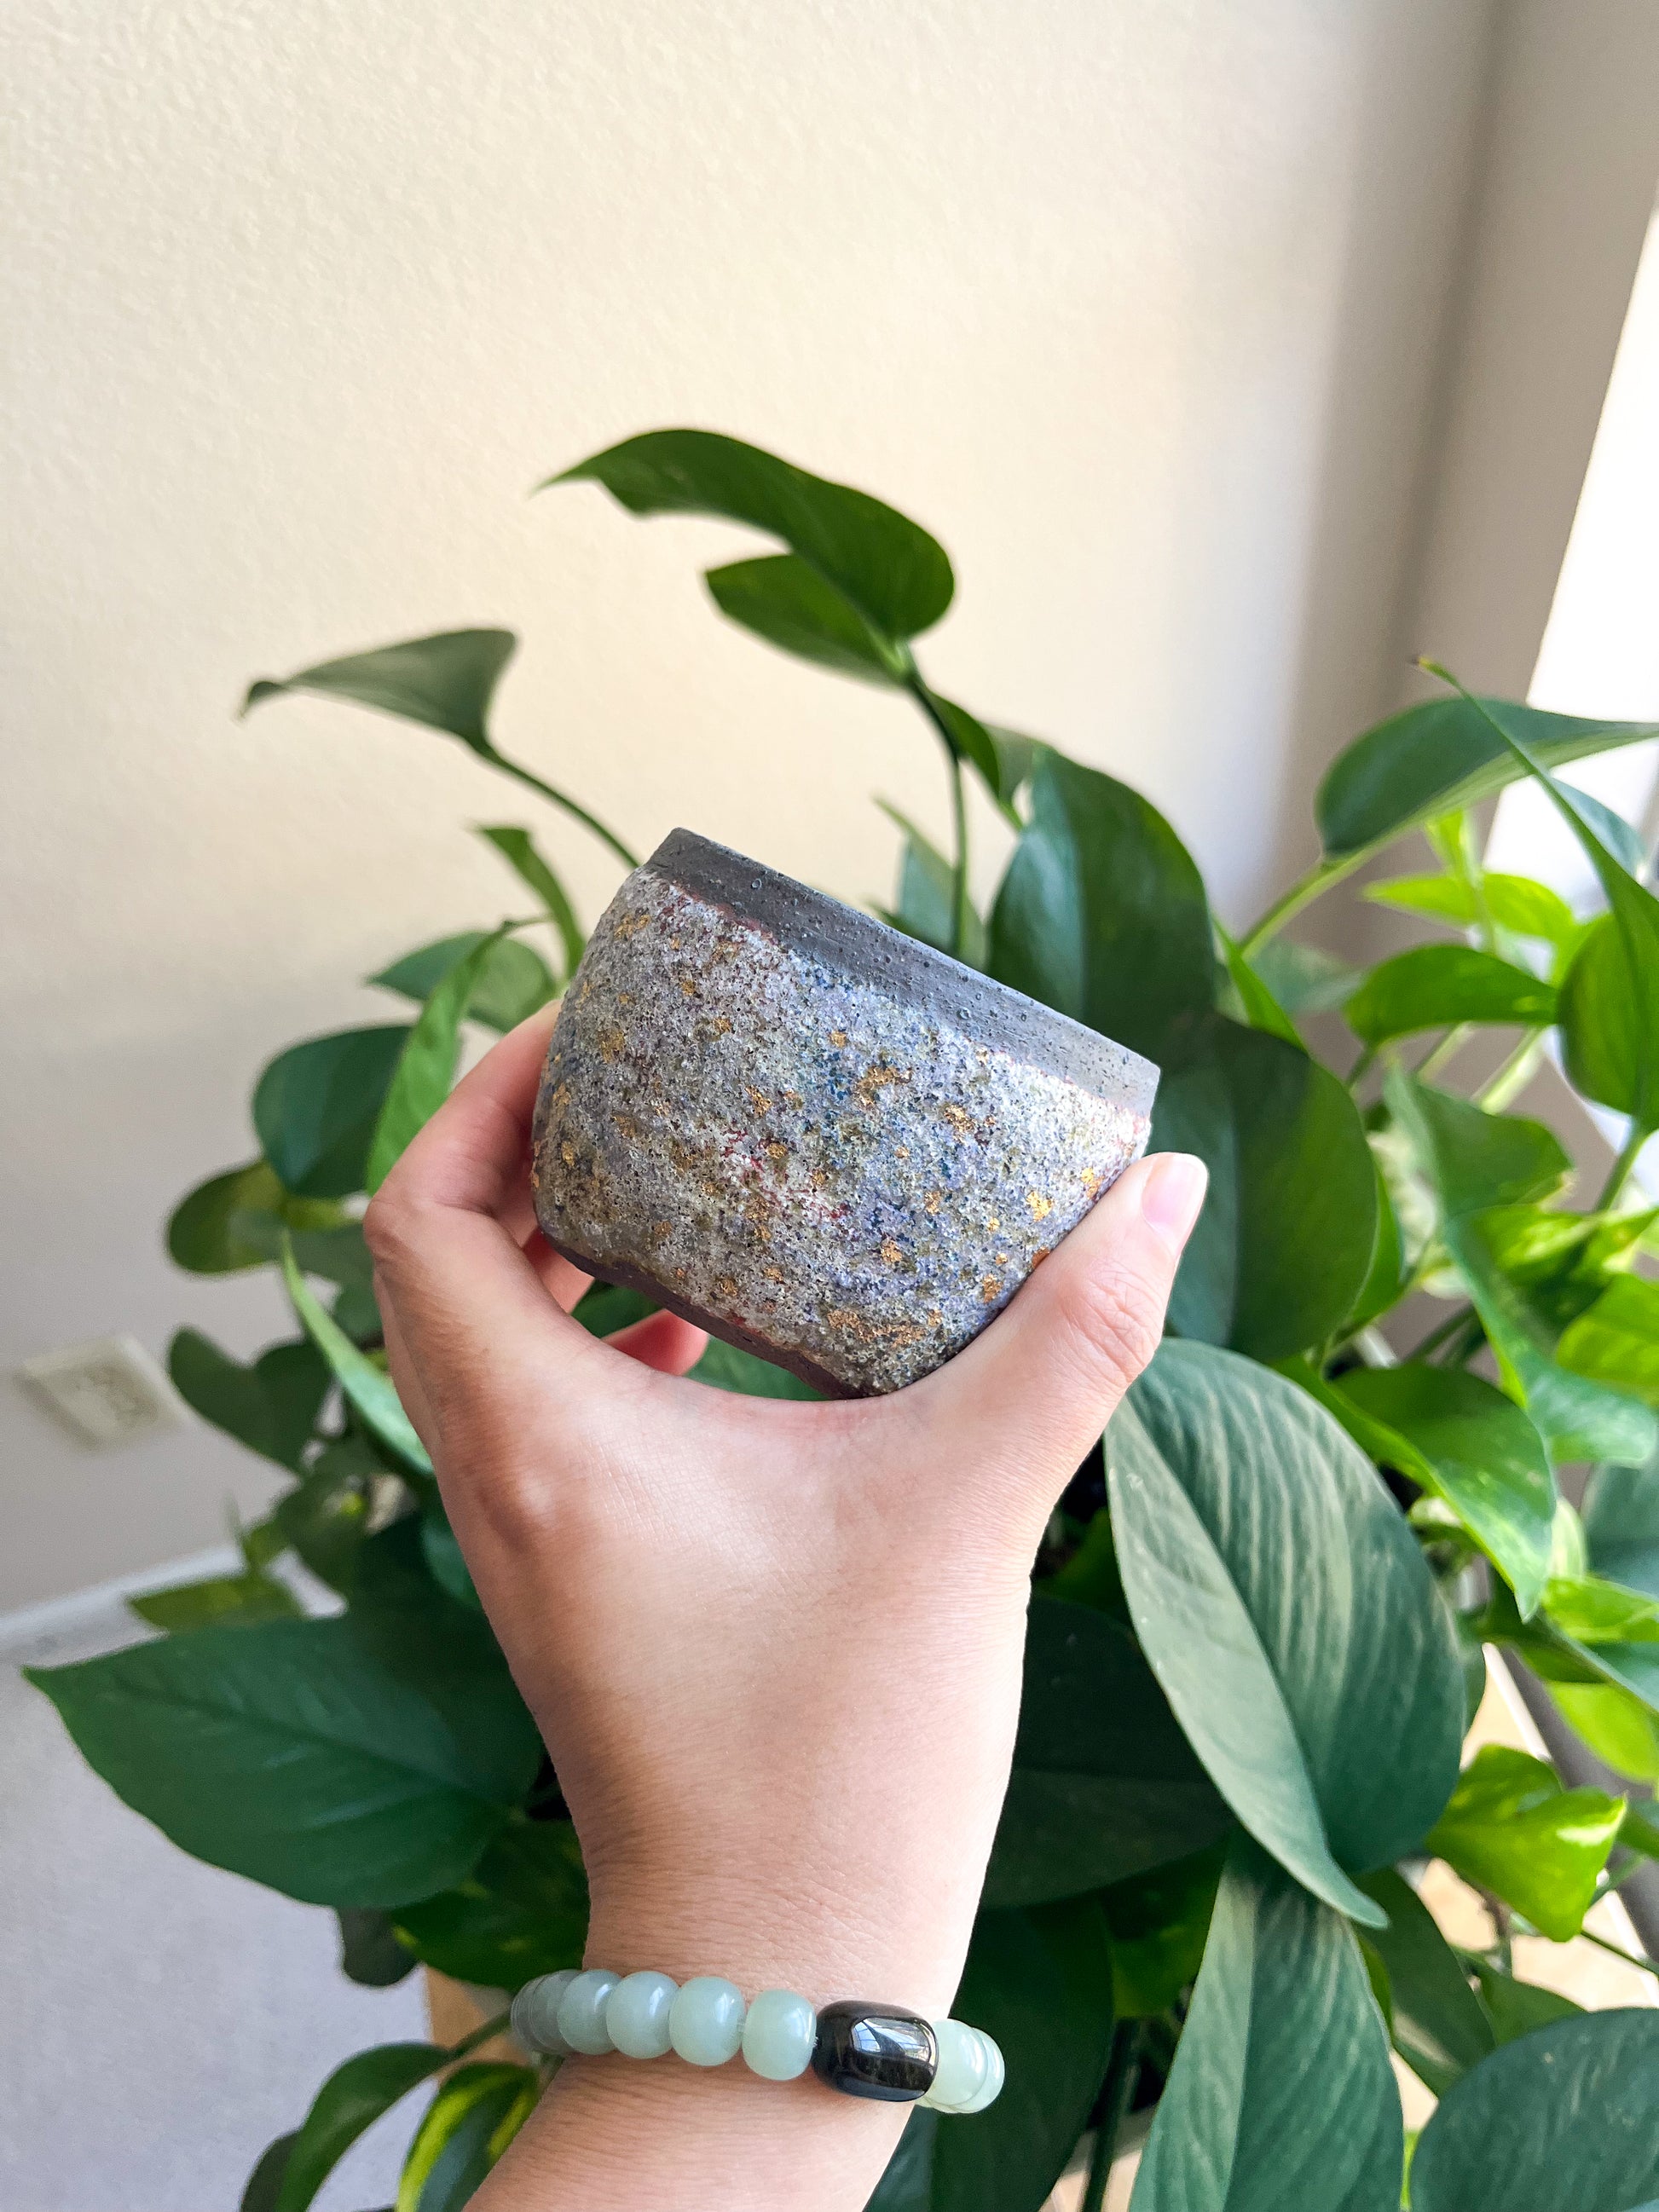 Handcrafted Woodfired Rough Clay Teacup (multi-gemstone glaze)